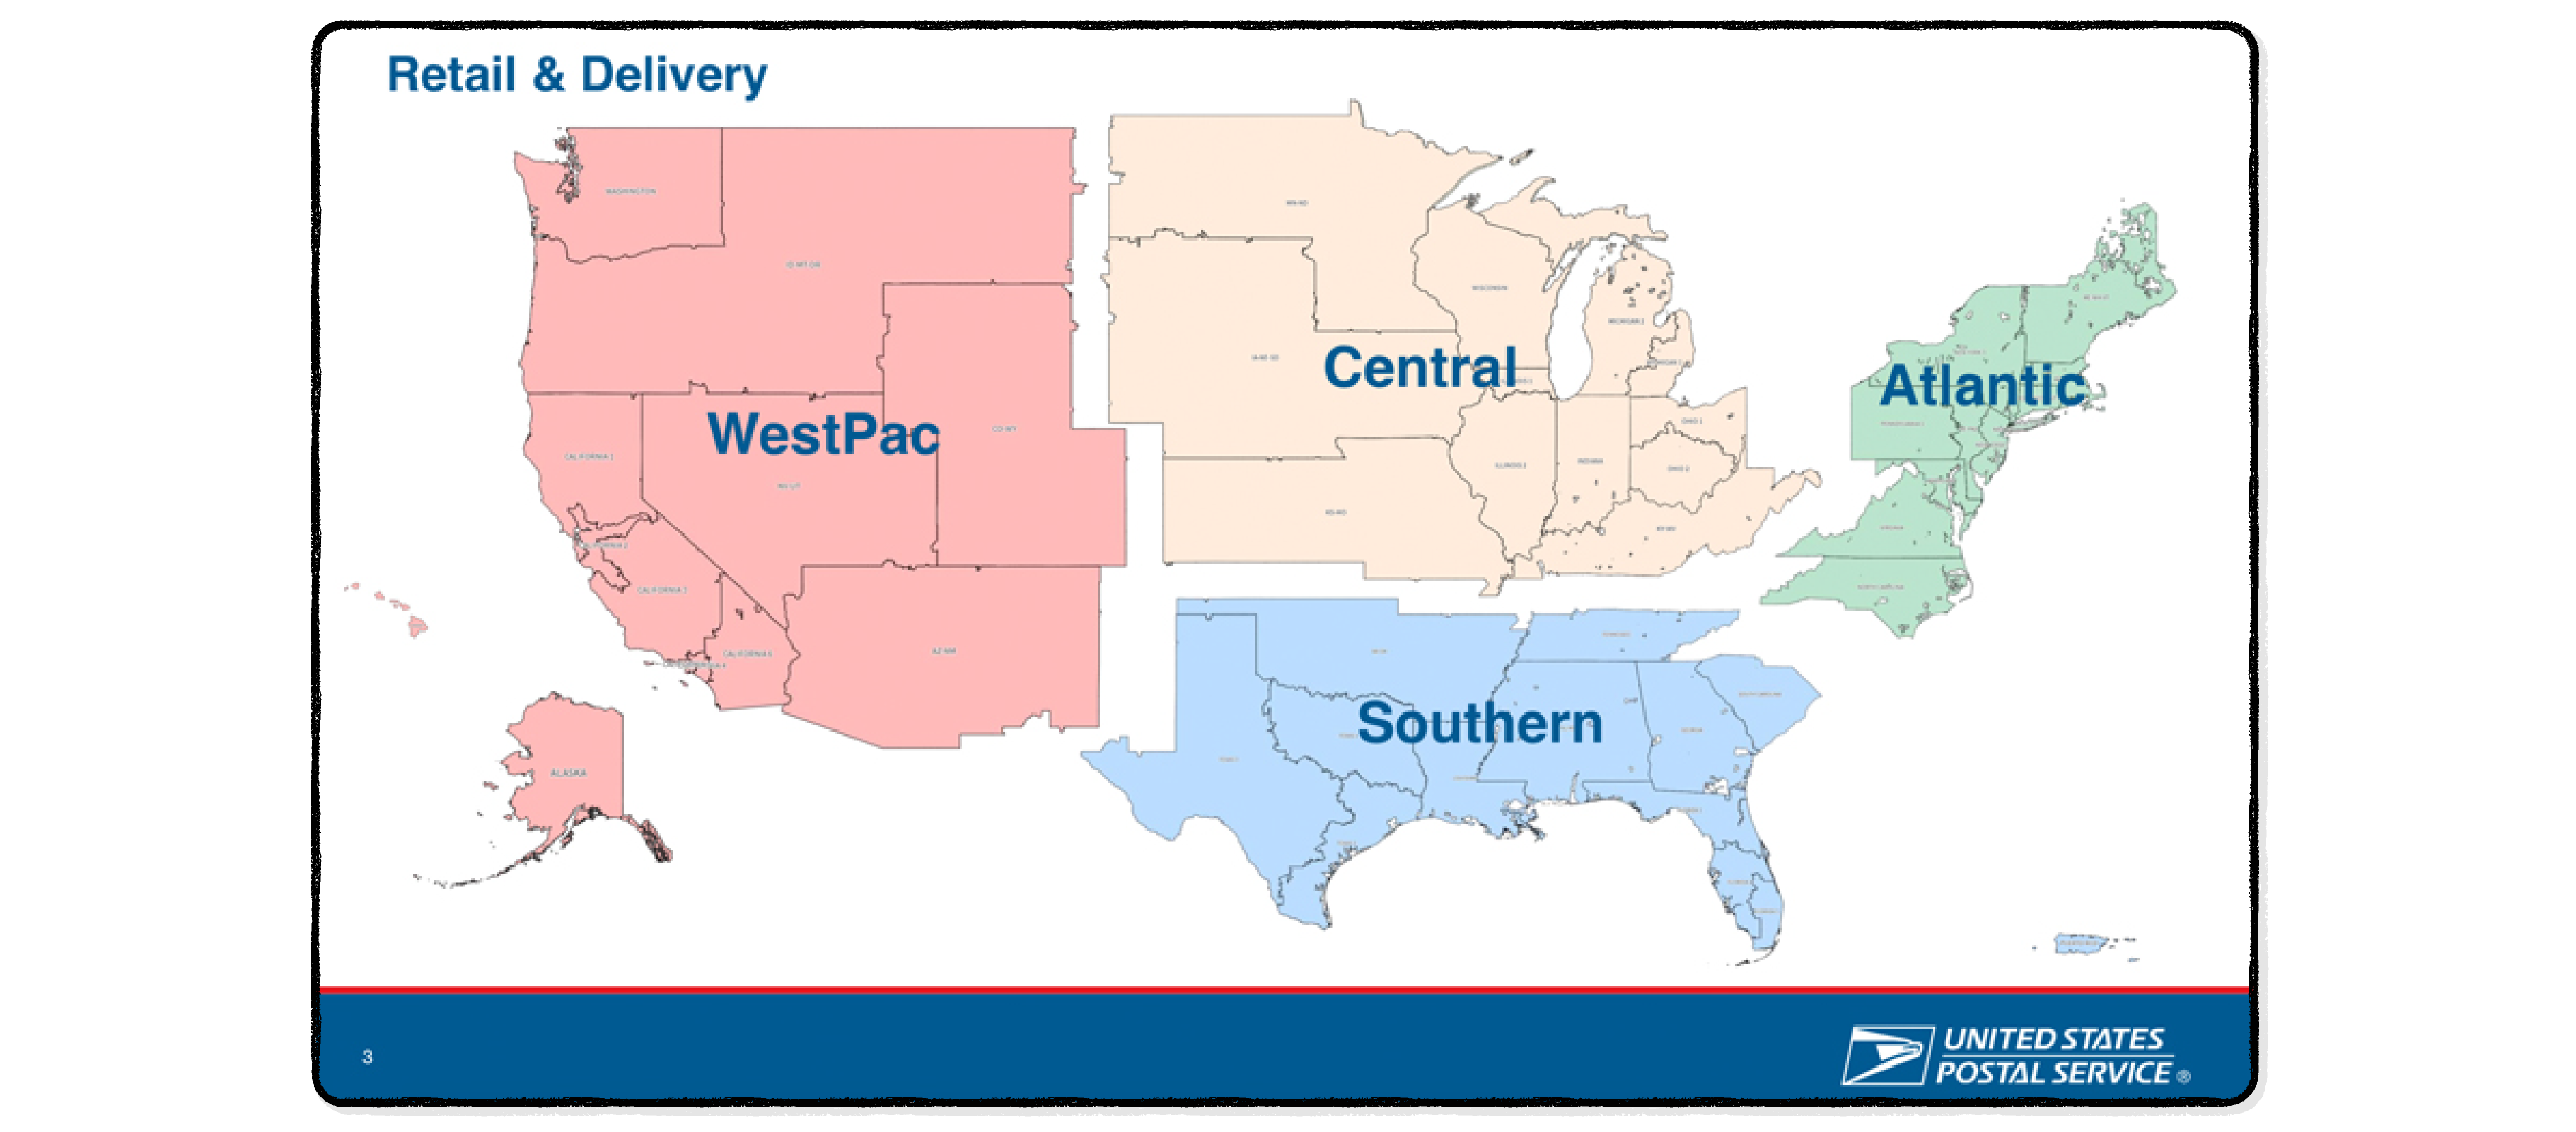 Major shipping companies USPS delivery segmentation by state